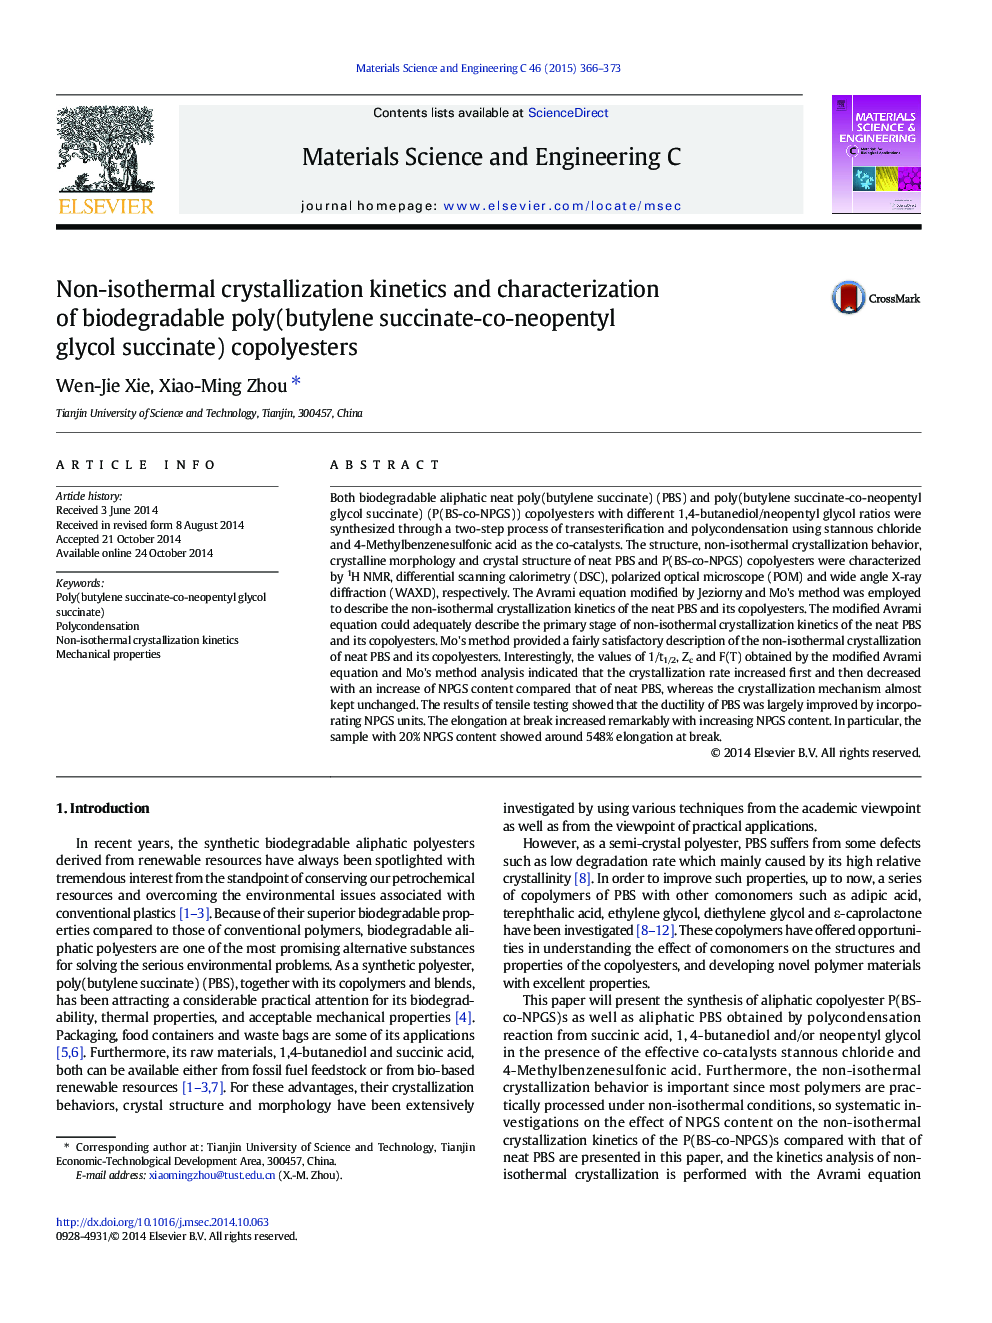 Non-isothermal crystallization kinetics and characterization of biodegradable poly(butylene succinate-co-neopentyl glycol succinate) copolyesters